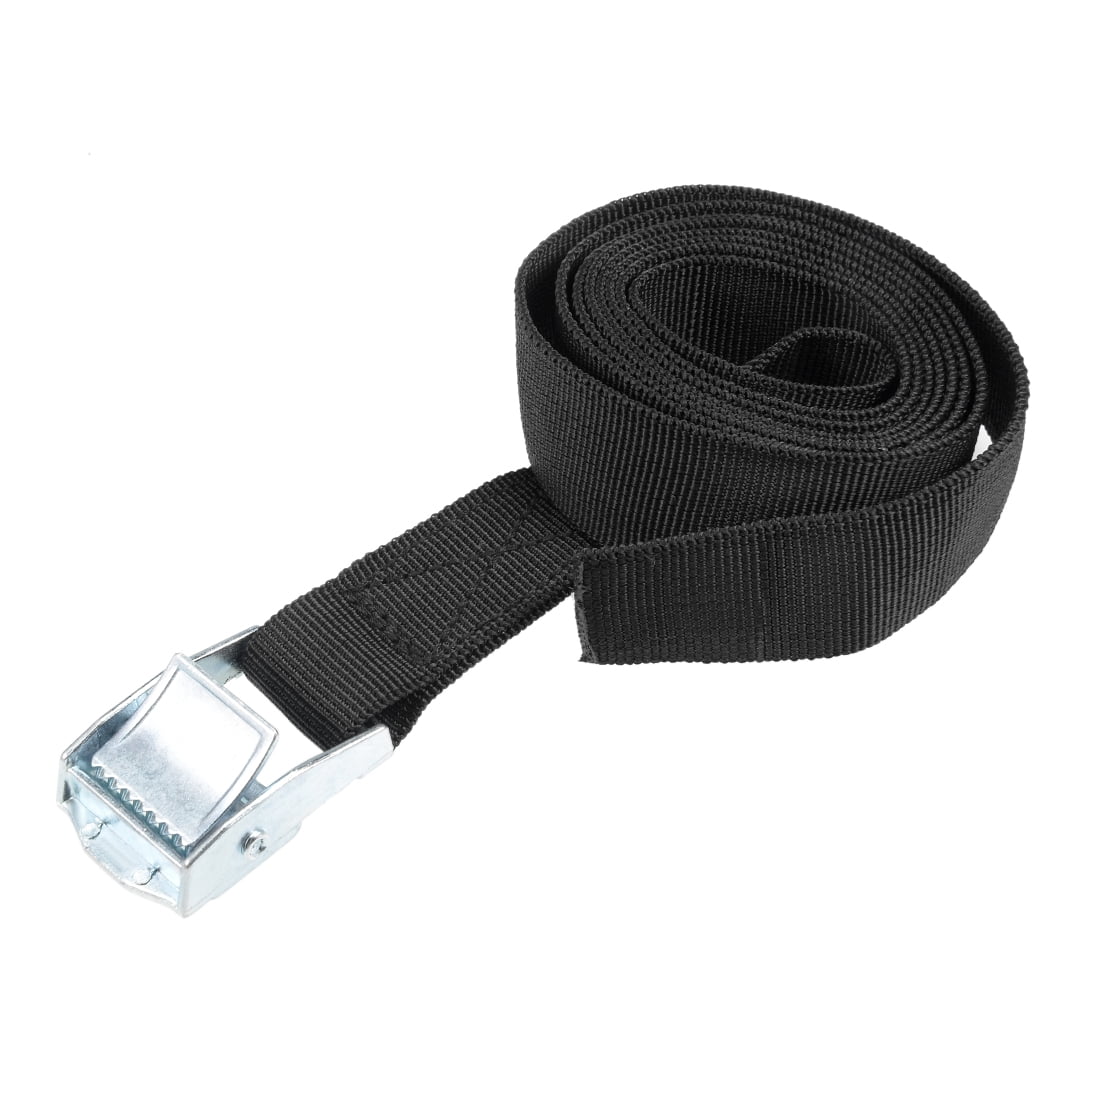 Polypro Webbing Cam Buckle Shipped from The USA! Metal 1" Inch with 6' Ft